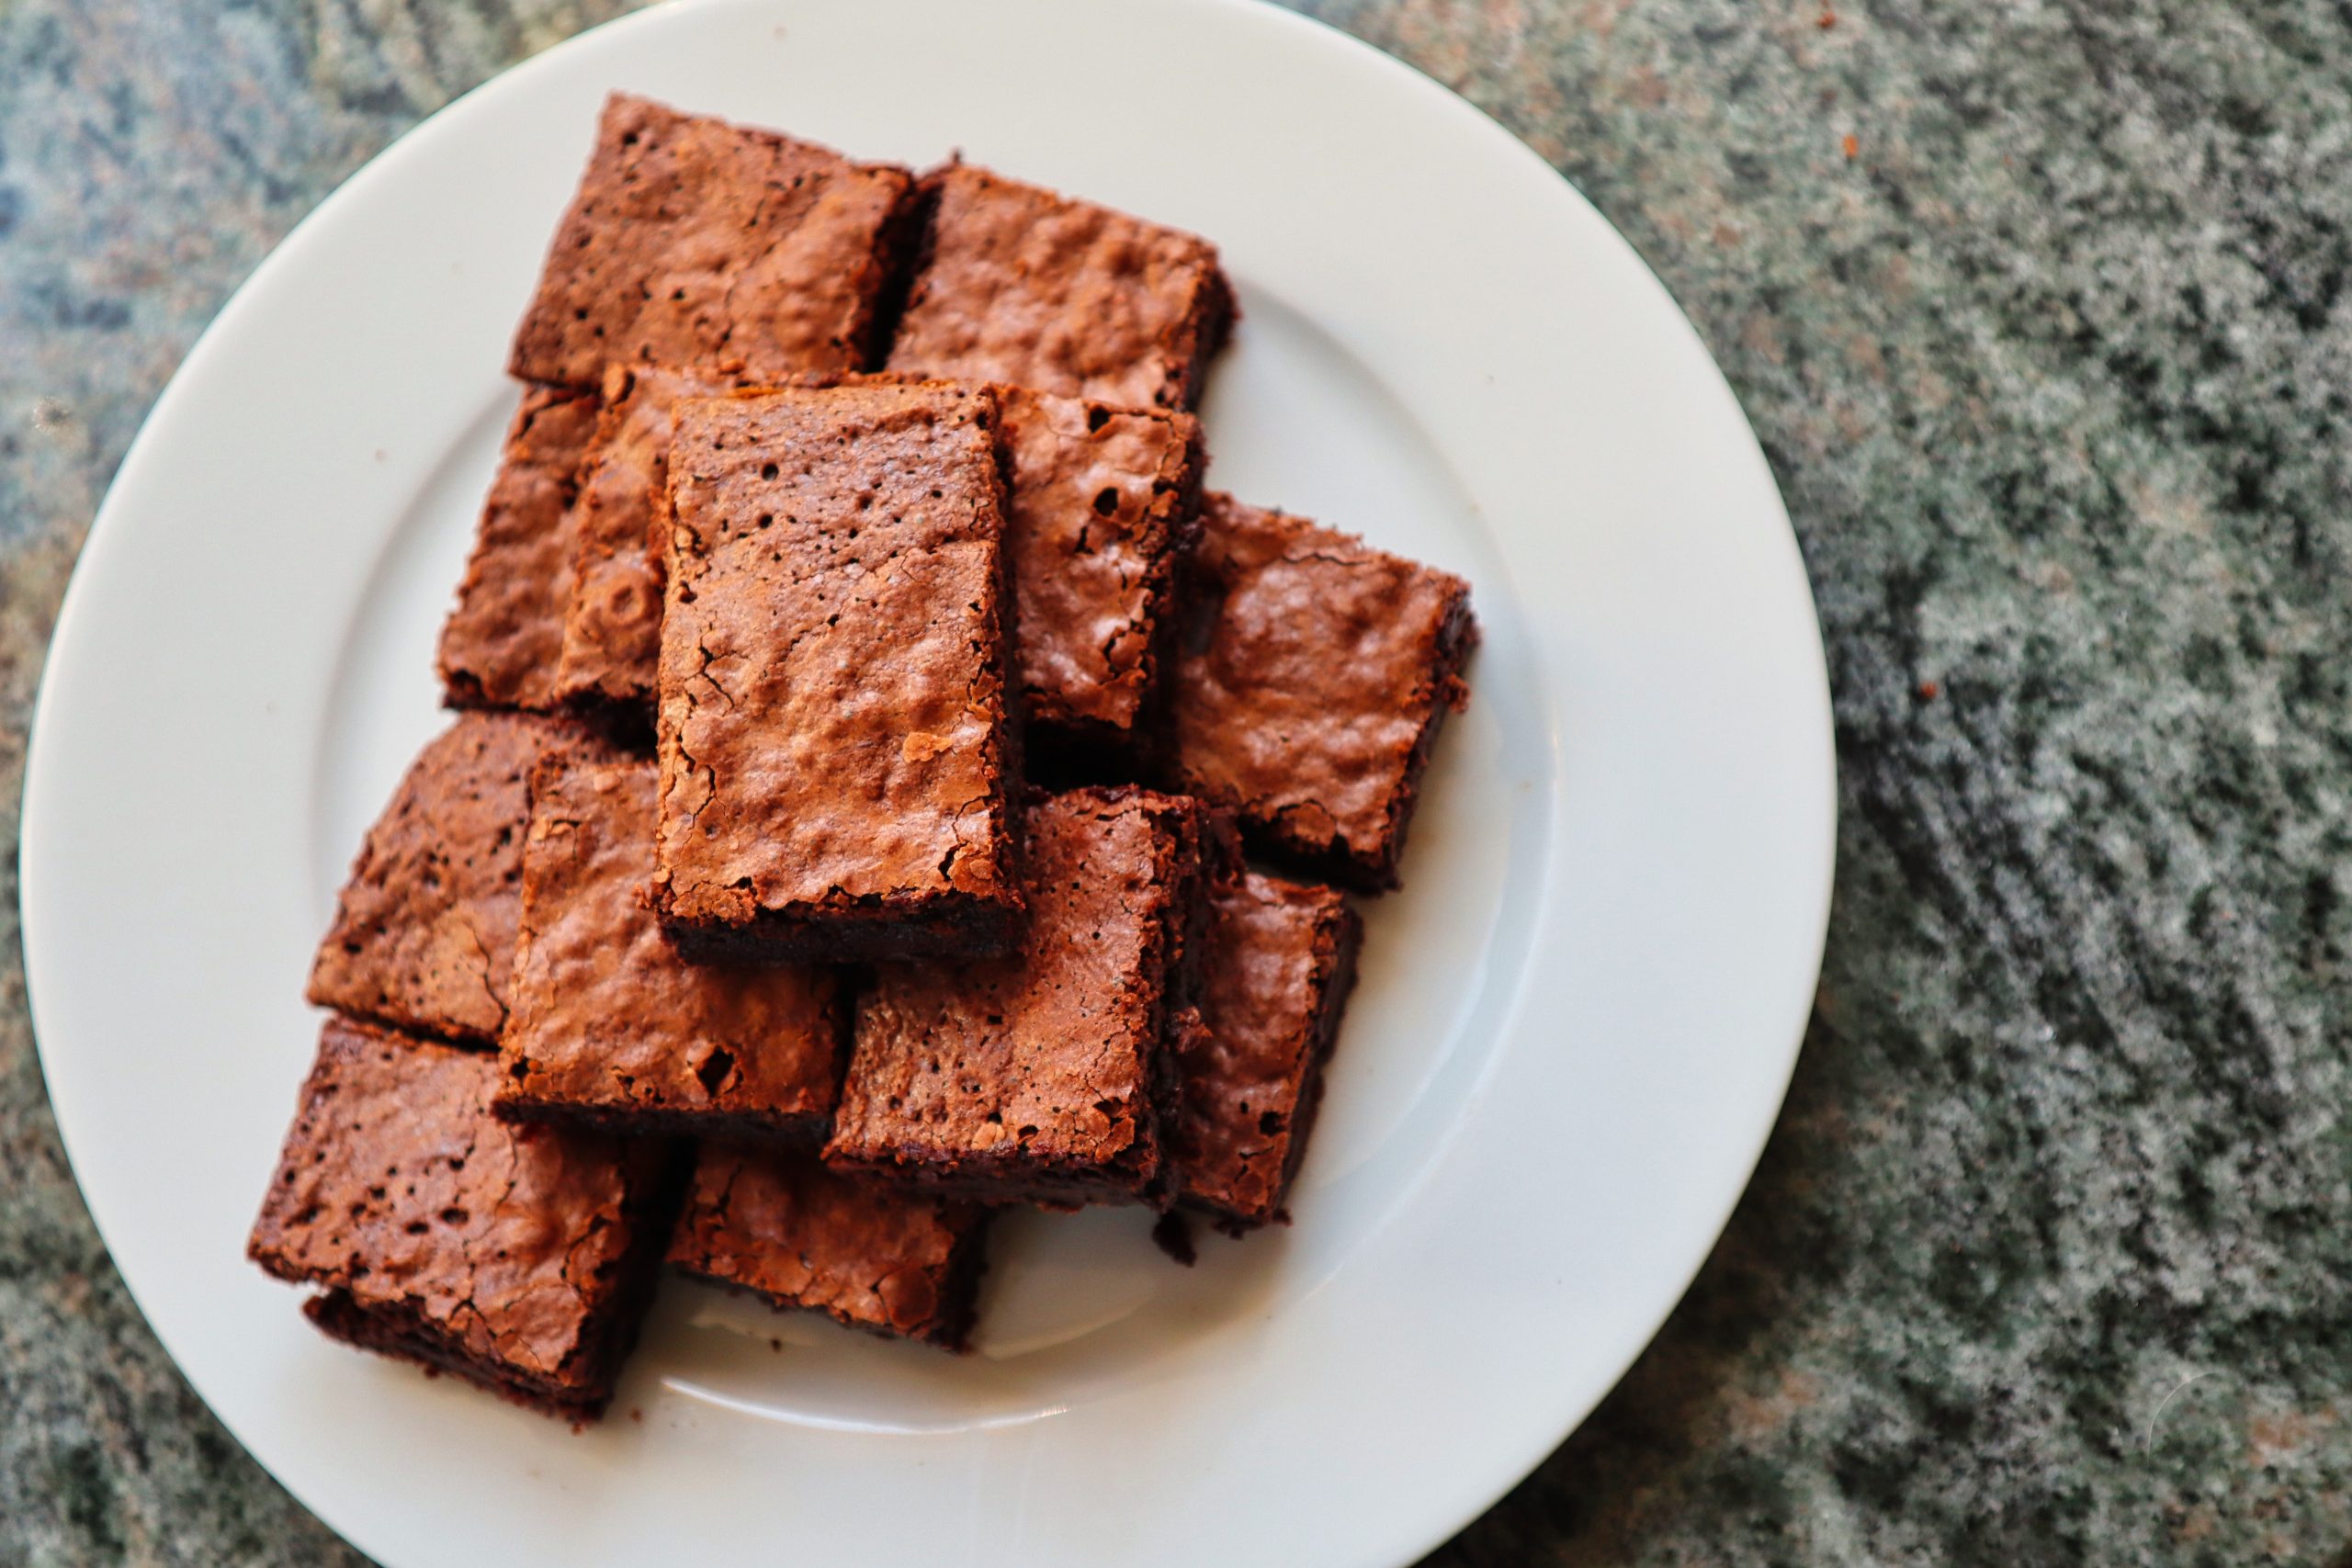 Olive Oil Brownies Without Chocolate Chips Recipe